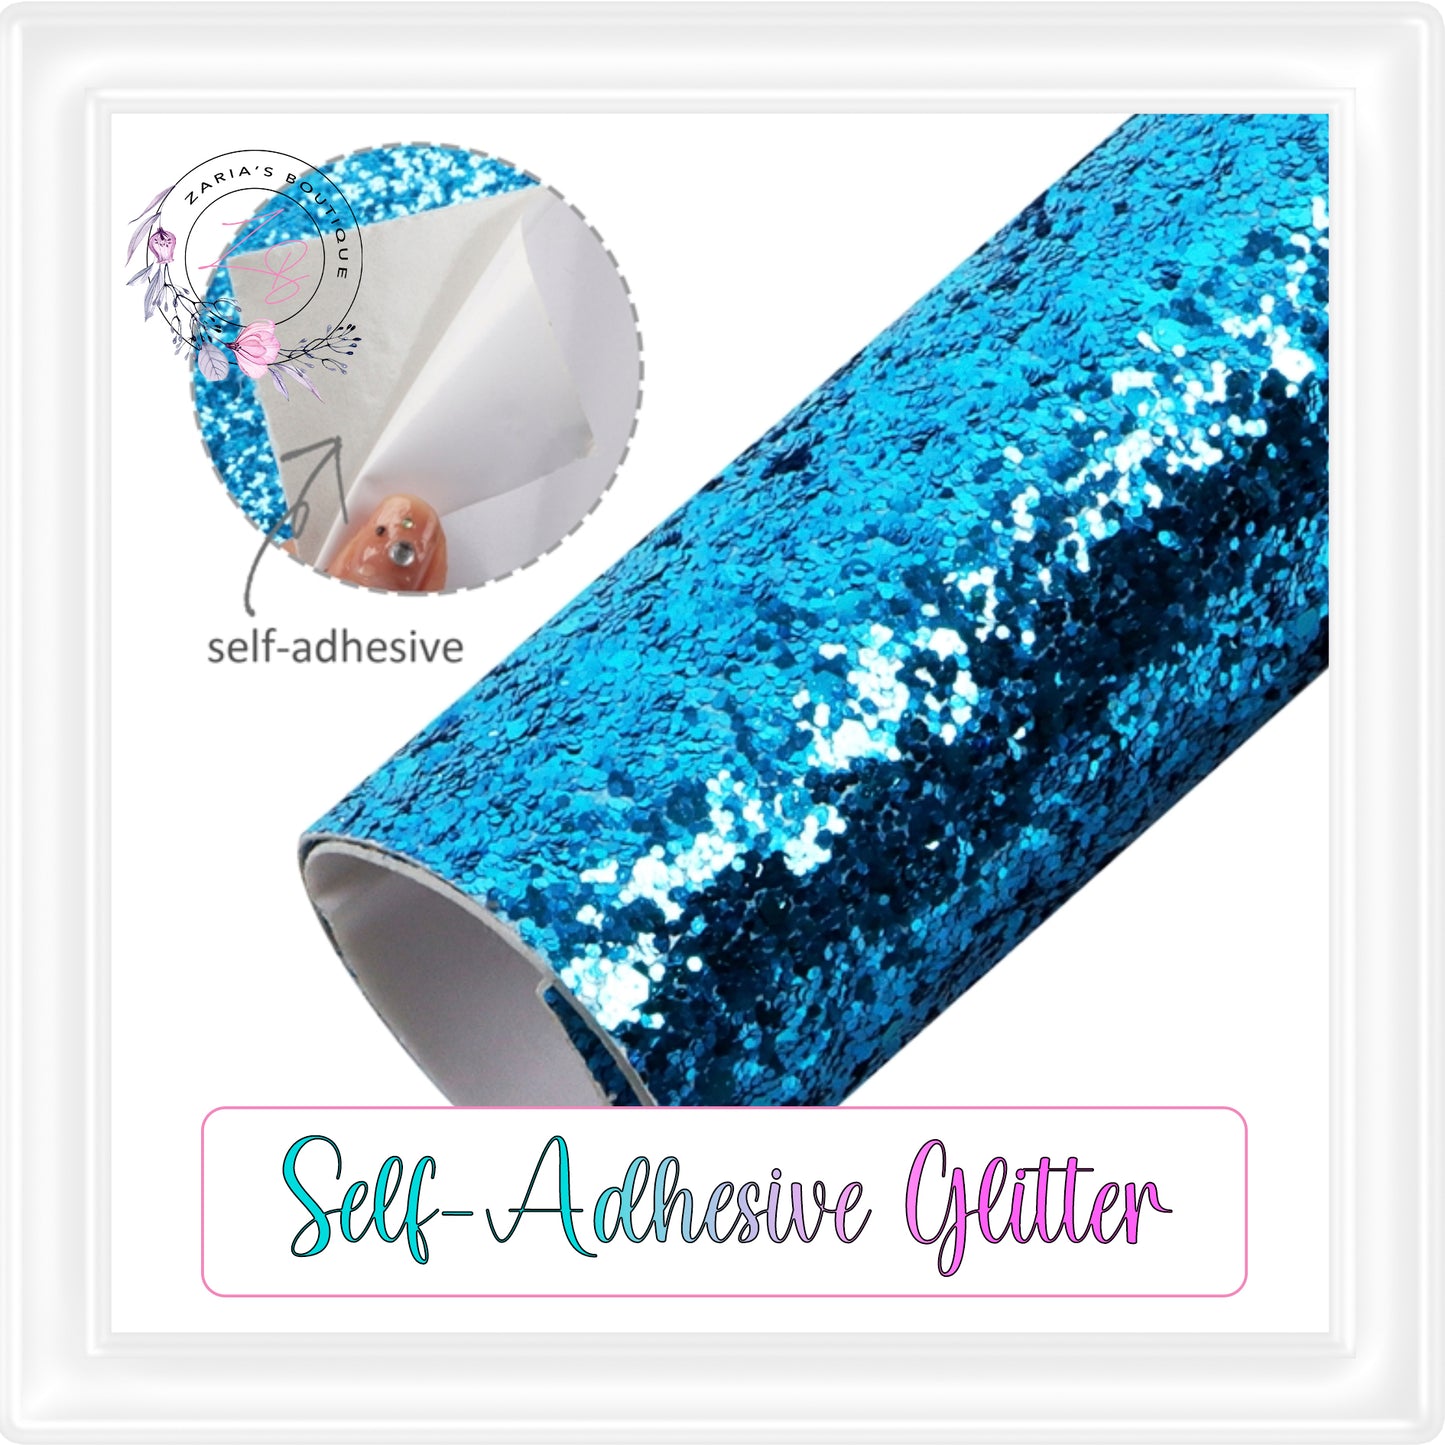 ⋅ Self-Adhesive Backed Medium Glitter ⋅ For Double-Sided Projects ⋅ BLUE ⋅